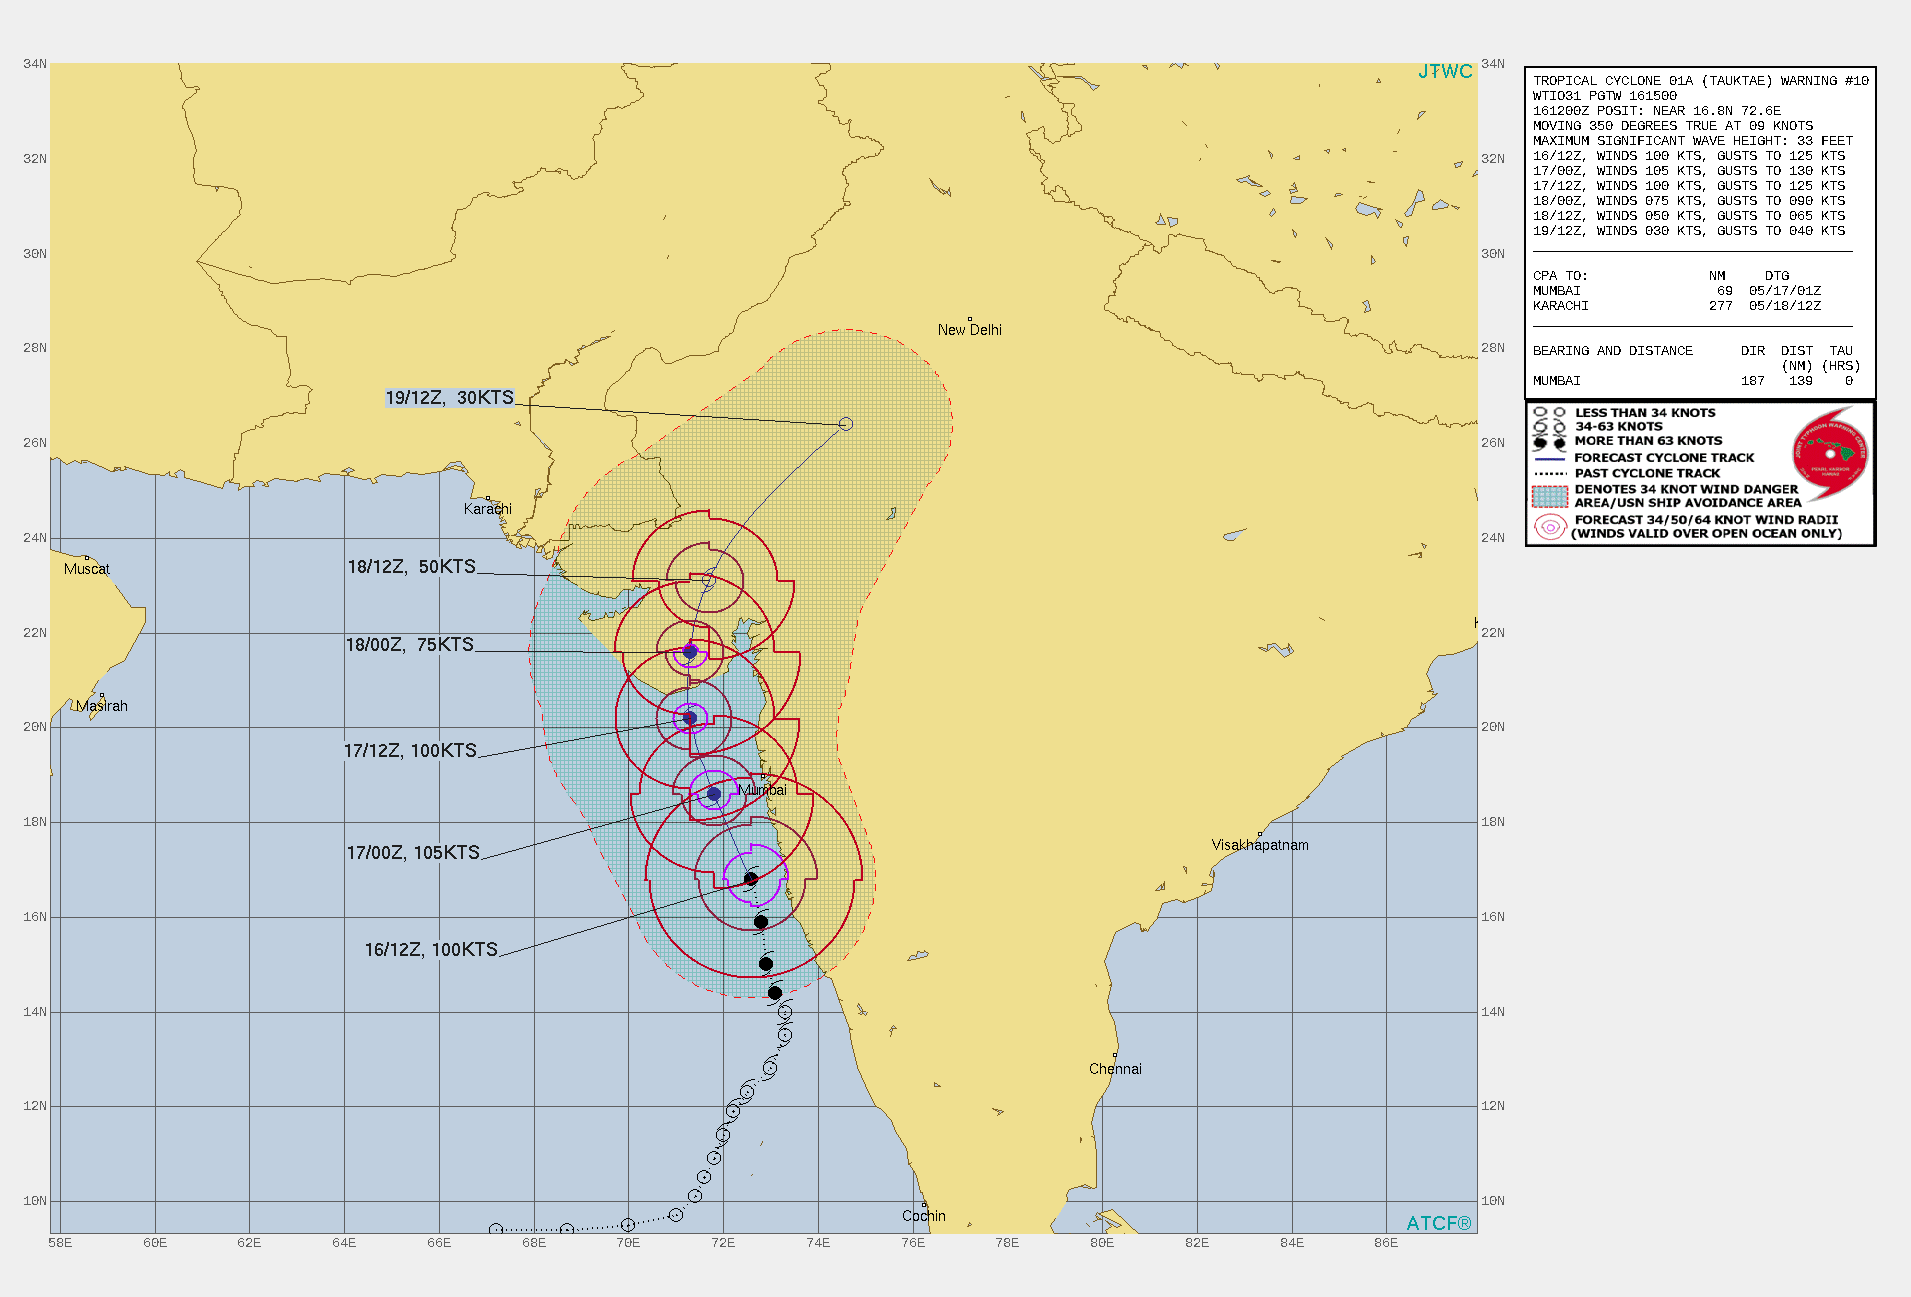 TC 01A(TAUKTAE). WARNING 10 ISSUED AT 16/15UTC.THE UPPER-LEVEL ANALYSIS INDICATES FAVORABLE ENVIRONMENTAL CONDITIONS WITH STRONG POLEWARD OUTFLOW, LOW  TO MODERATE VERTICAL WIND SHEAR AND WARM (30-31C) SEA  SURFACE TEMPERATURES. TC 01A WILL CONTINUE ON ITS CURRENT TRACK  THROUGH 24H ALONG THE WESTERN PERIPHERY OF A DEEP-LAYERED  SUBTROPICAL RIDGE TO THE EAST. THE SYSTEM IS CURRENTLY UNDERGOING  RAPID INTENSIFICATION (RI), FUELED BY A FAVORABLE ENVIRONMENT  LASTING THROUGH THE NEXT 6 HOURS AND WILL REACH A PEAK INTENSITY OF  105 KNOTS/US CAT 3. THEREAFTER, THE SYSTEM WILL BEGIN A WEAKENING TREND AS IT  ENTERS A REGION OF HIGHER SHEAR, ROUNDS THE RIDGE AXIS, AND THEN  MAKES LANDFALL BETWEEN VERAVAL AND MAHUVA, INDIA, BETWEEN 24H AND  36H. AFTER MAKING LANDFALL, THE SYSTEM WILL BEGIN TO WEAKEN RAPIDLY  OVER THE RUGGED TERRAIN BEFORE COMPLETING DISSIPATION BY 72H,  POSSIBLY SOONER.